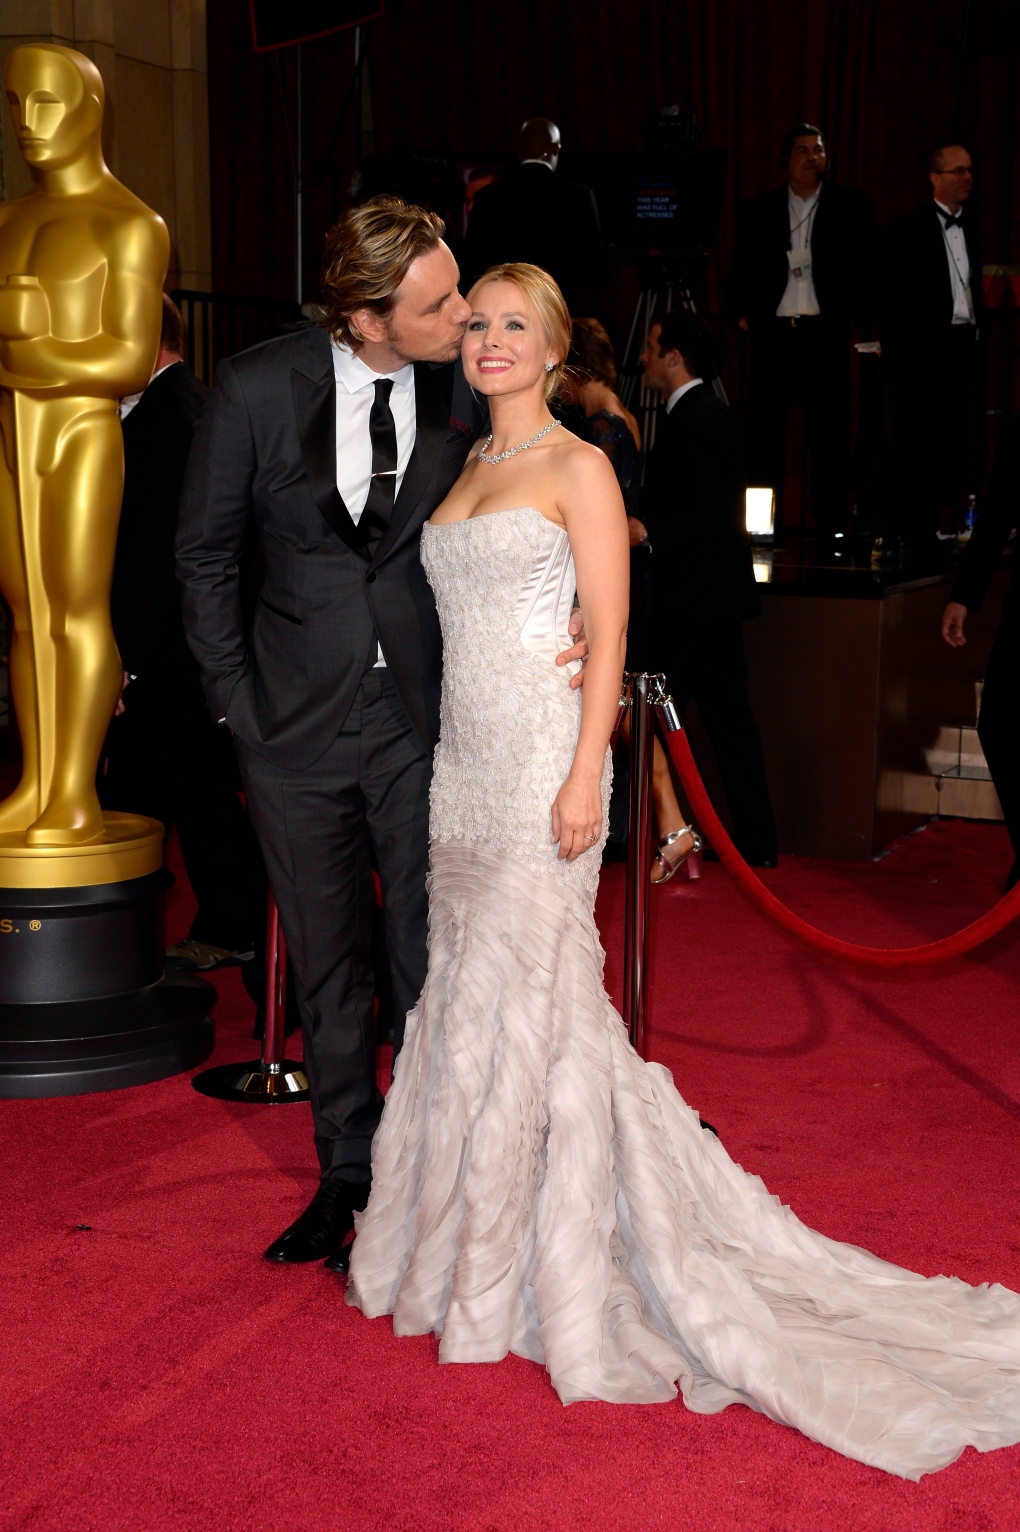 Dax Shepard and Kristen Bell at Oscars